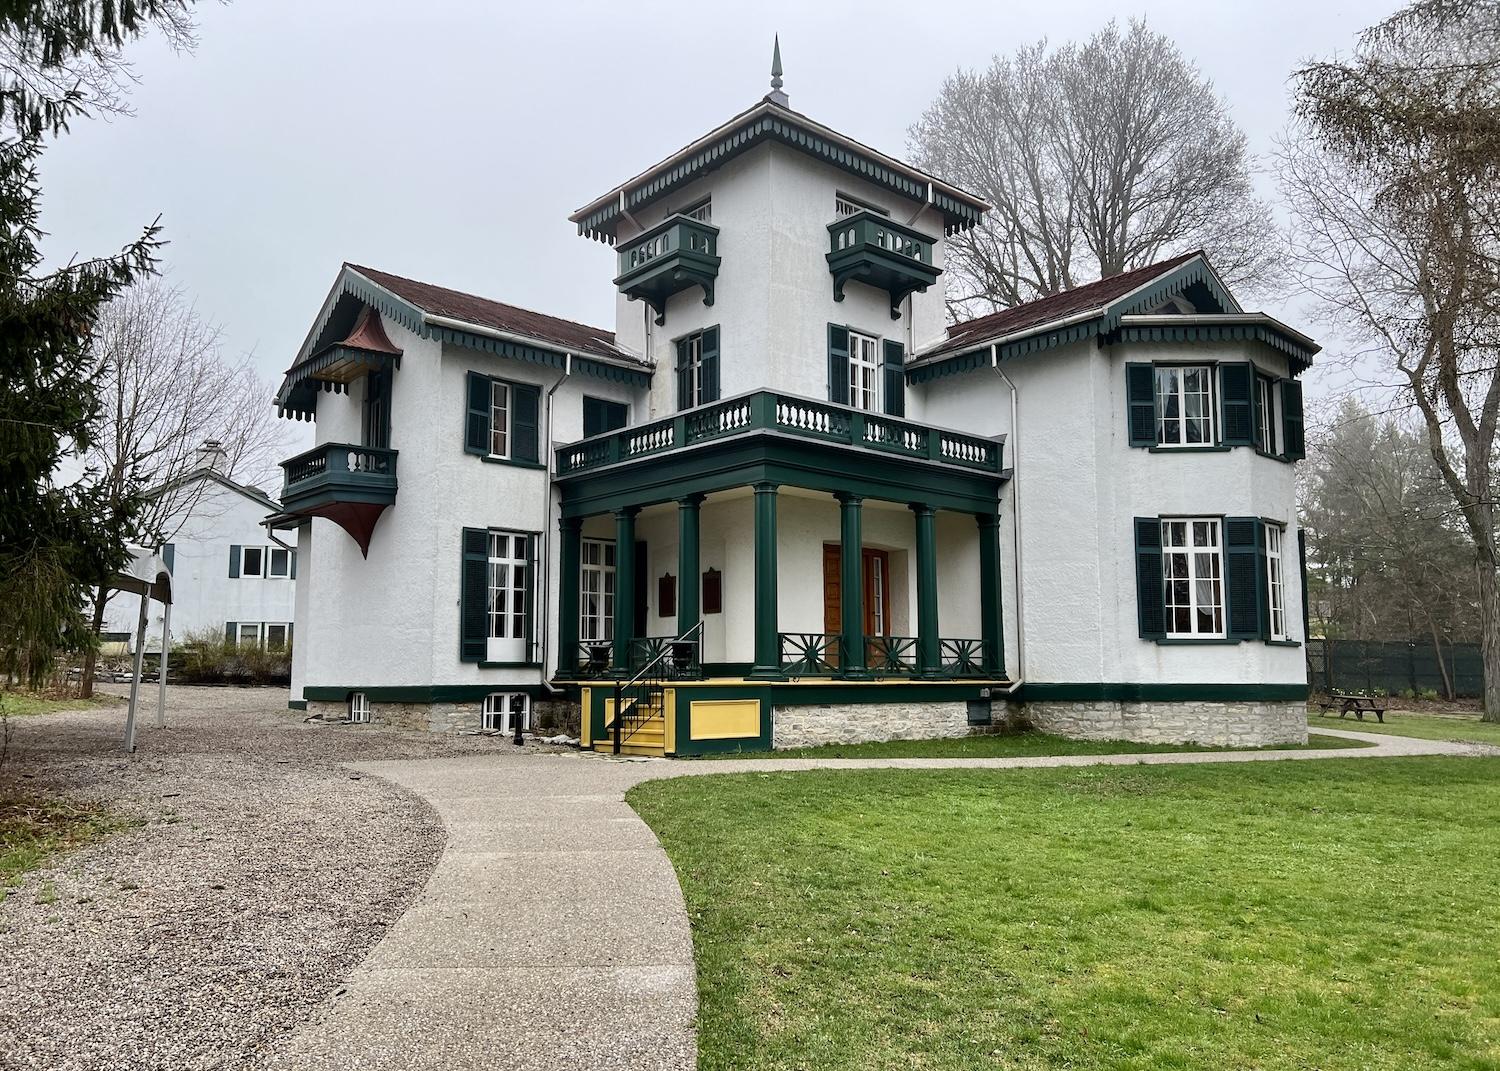 Bellevue House, home to Canada's first prime minister in 1848 and 1849, will reopen in May after a six-year renewal.